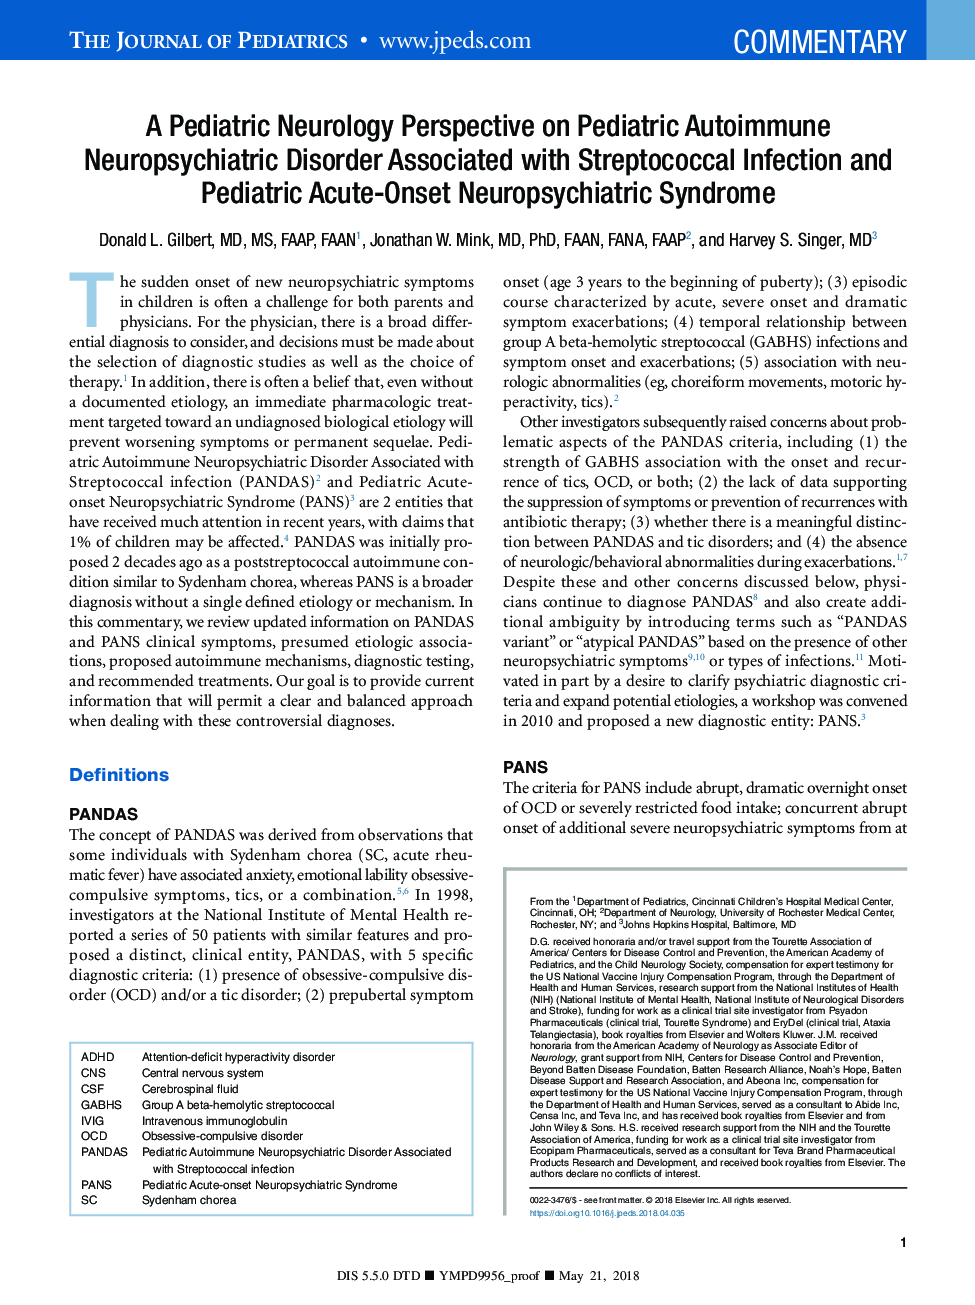 A Pediatric Neurology Perspective on Pediatric Autoimmune Neuropsychiatric Disorder Associated with Streptococcal Infection and Pediatric Acute-Onset Neuropsychiatric Syndrome